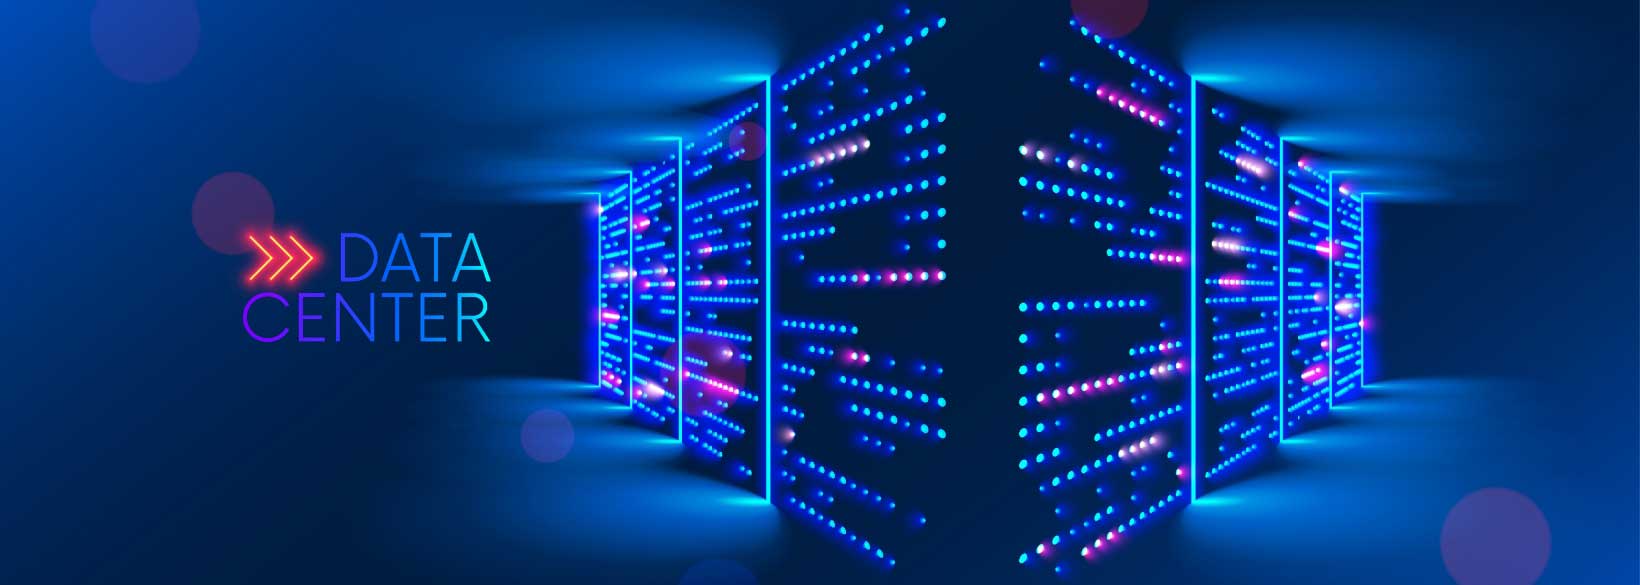 Data-Centre-Tiers-What-Are-the-Differences-and-Which-is-Best-for-Your-Organization.jpg